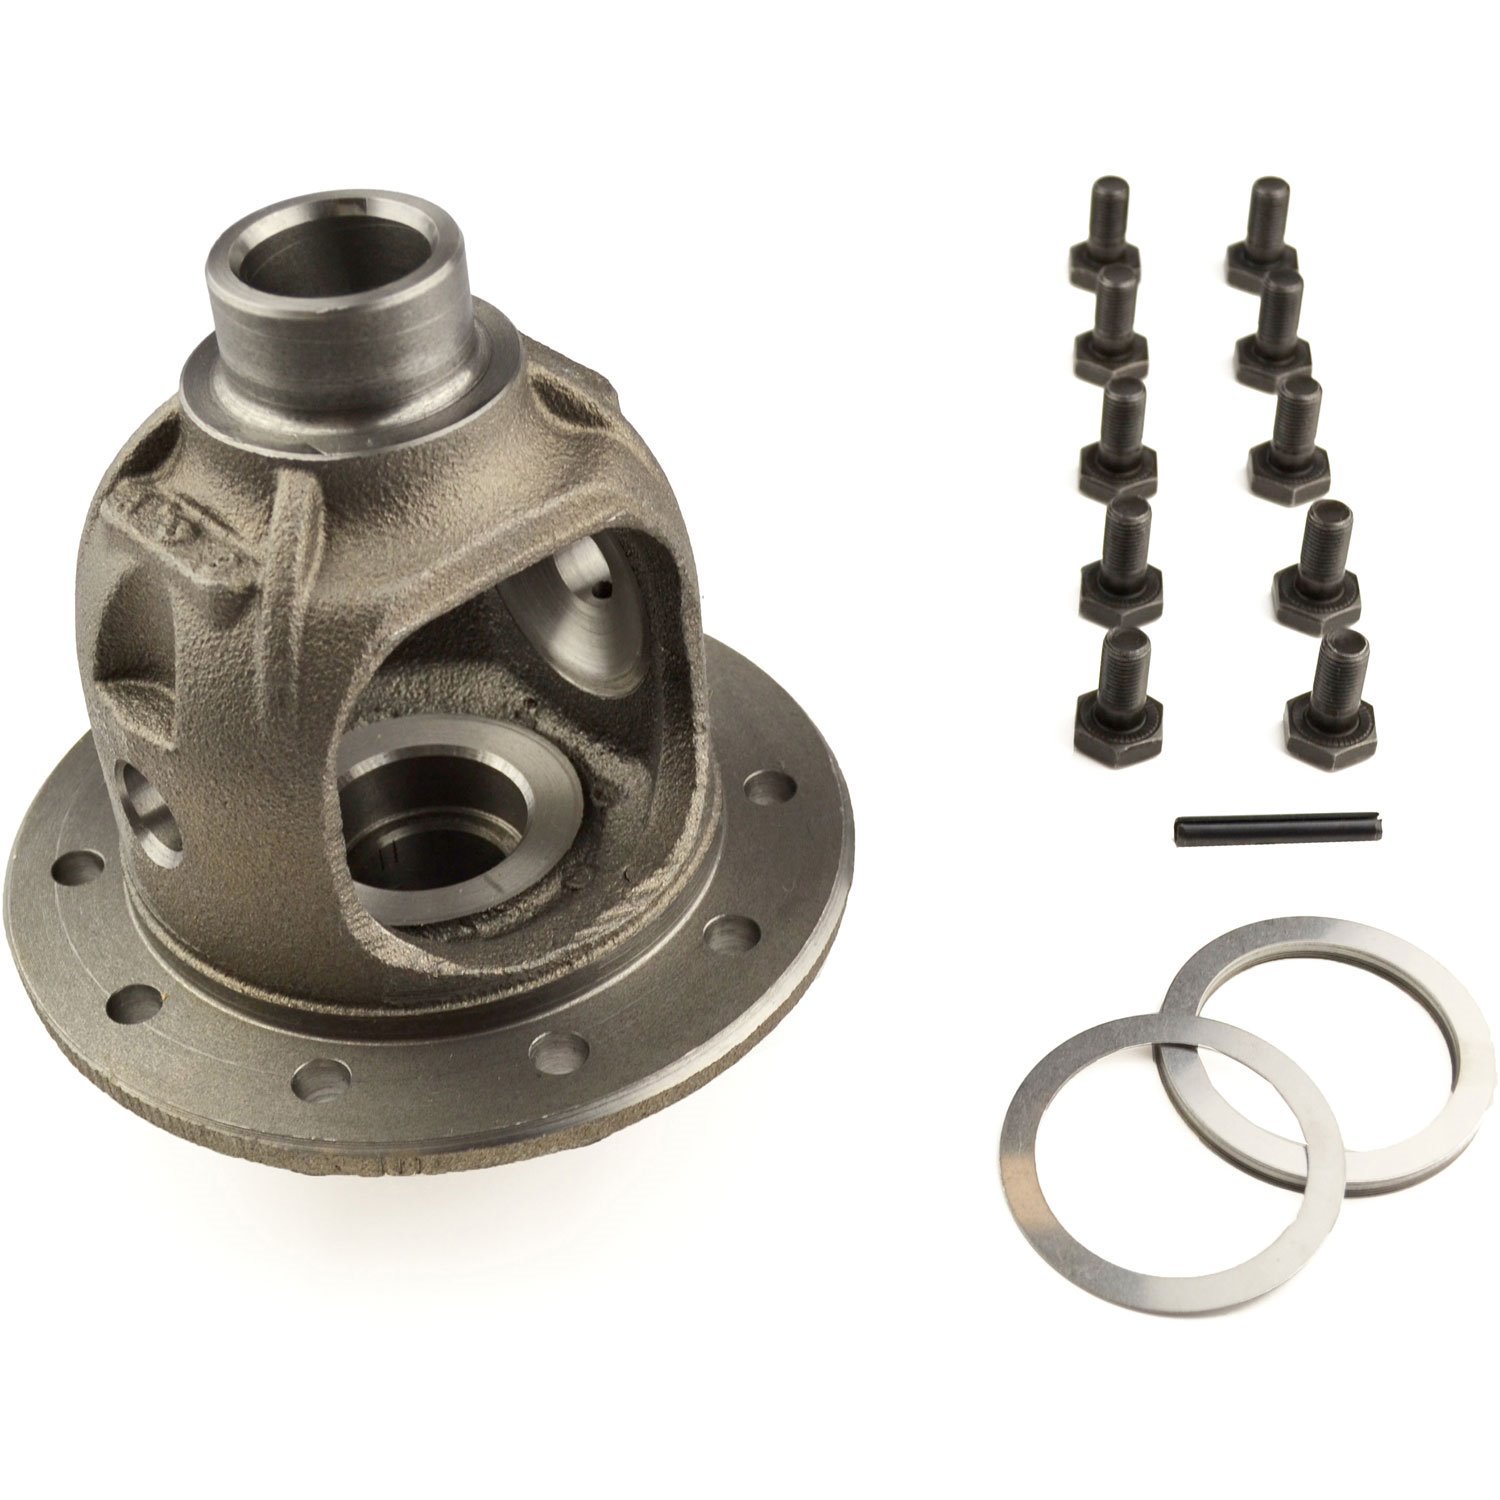 Differential Case Assembly Kit Fits: Dana 30 Front